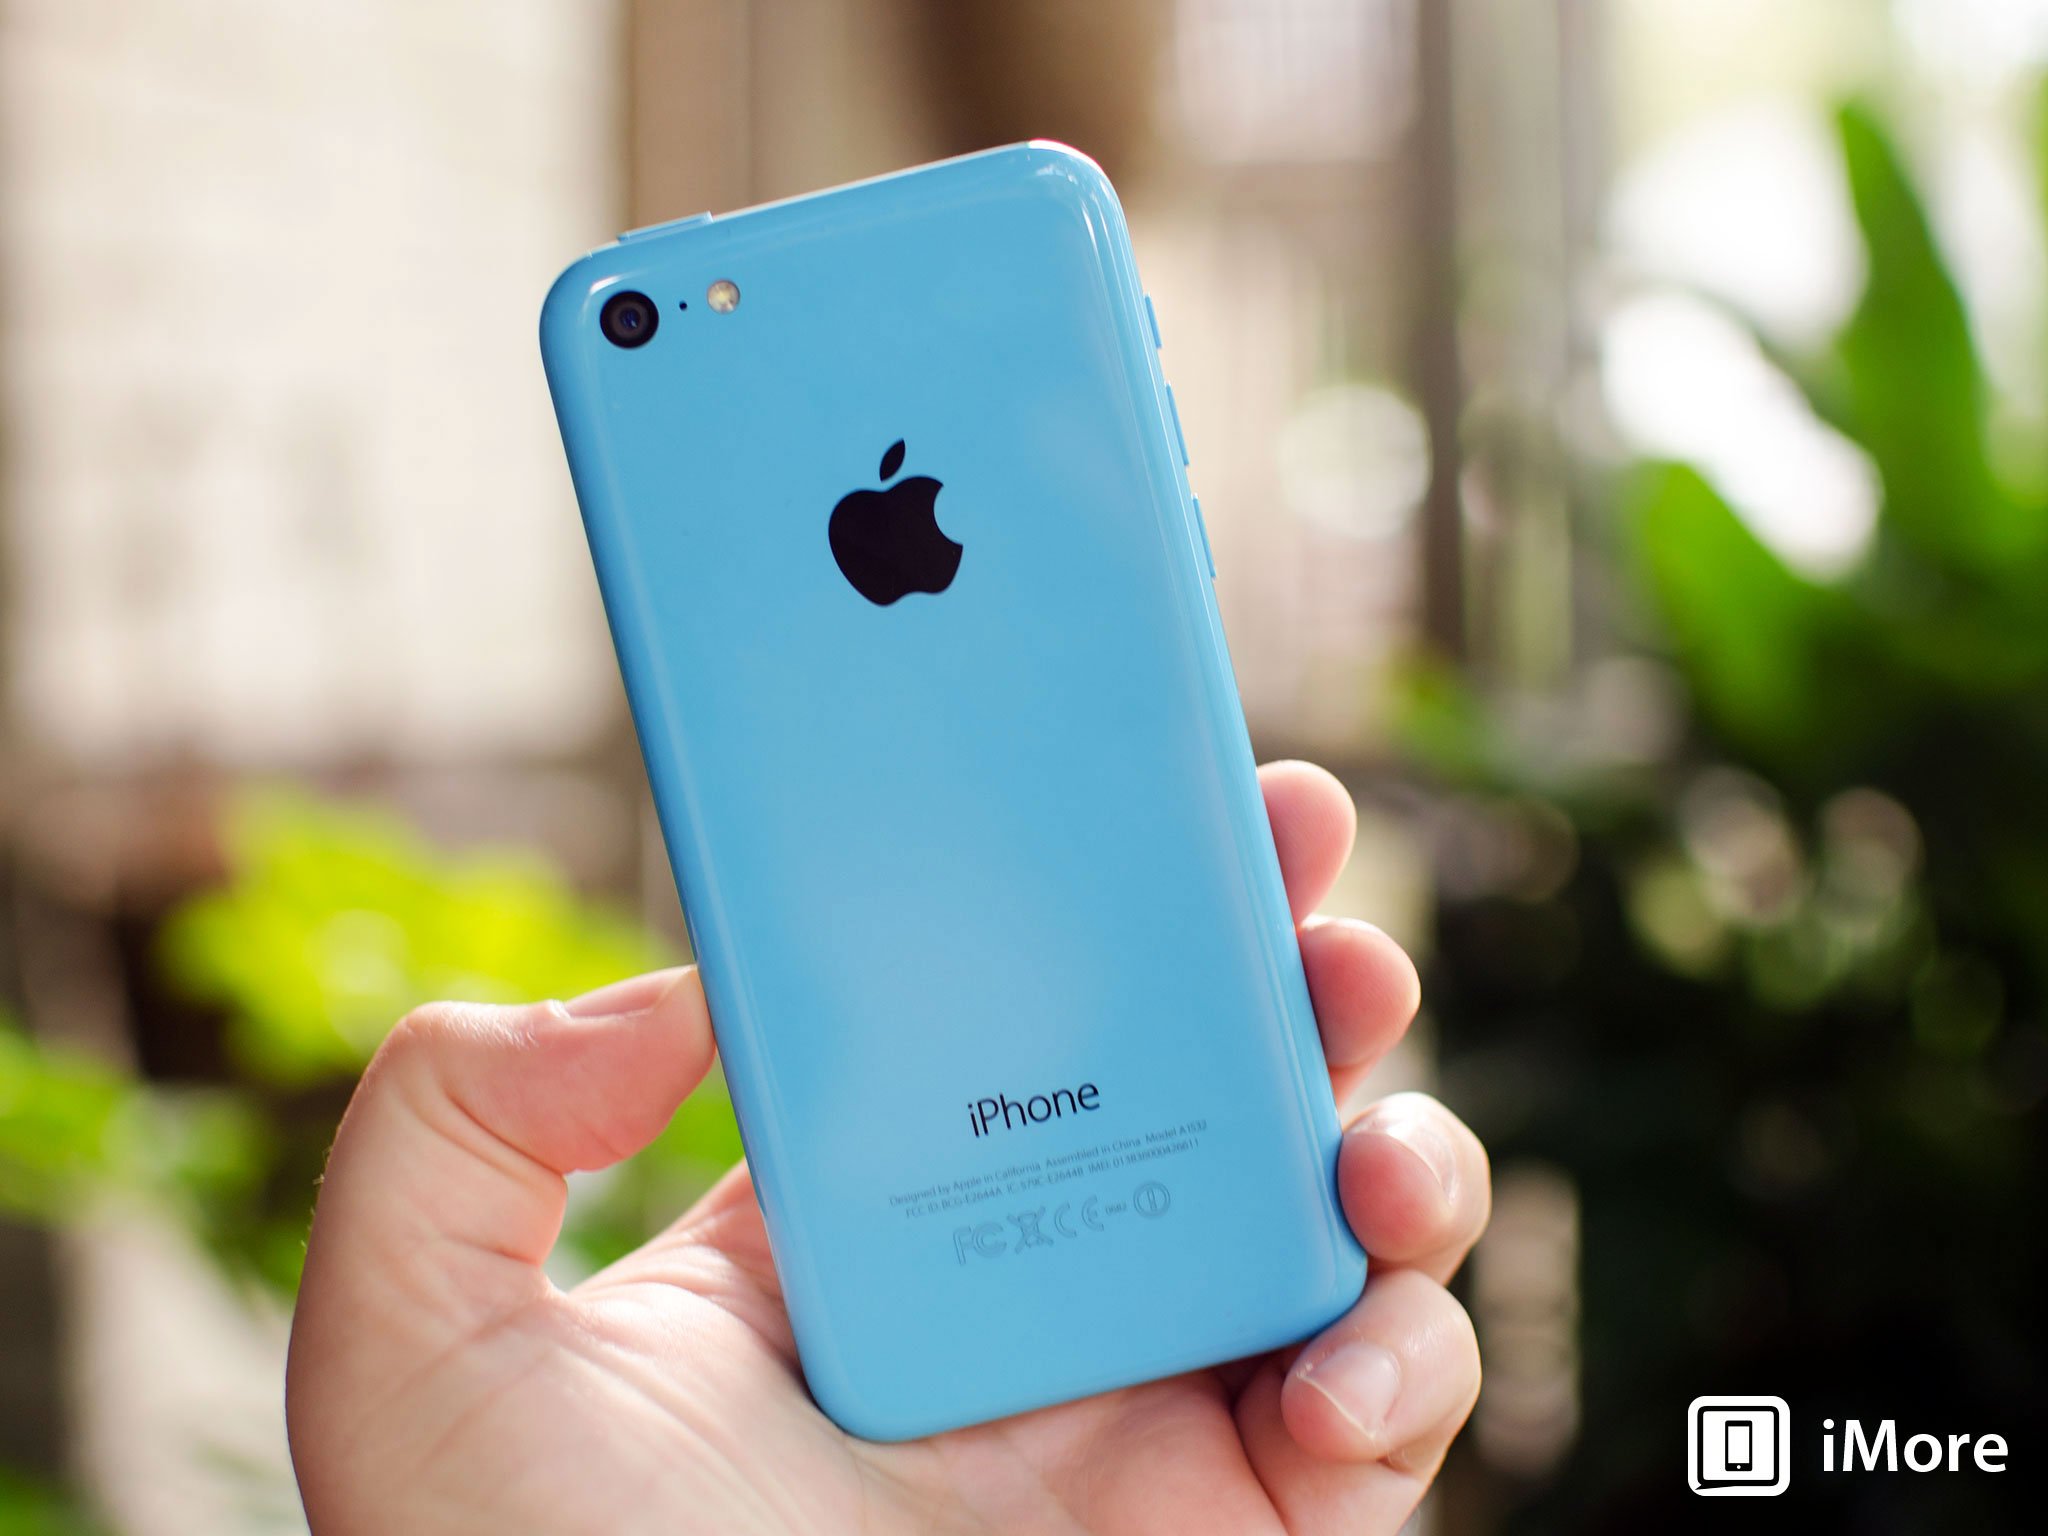 Apple reportedly granted more time to submit formal response in iPhone unlock case